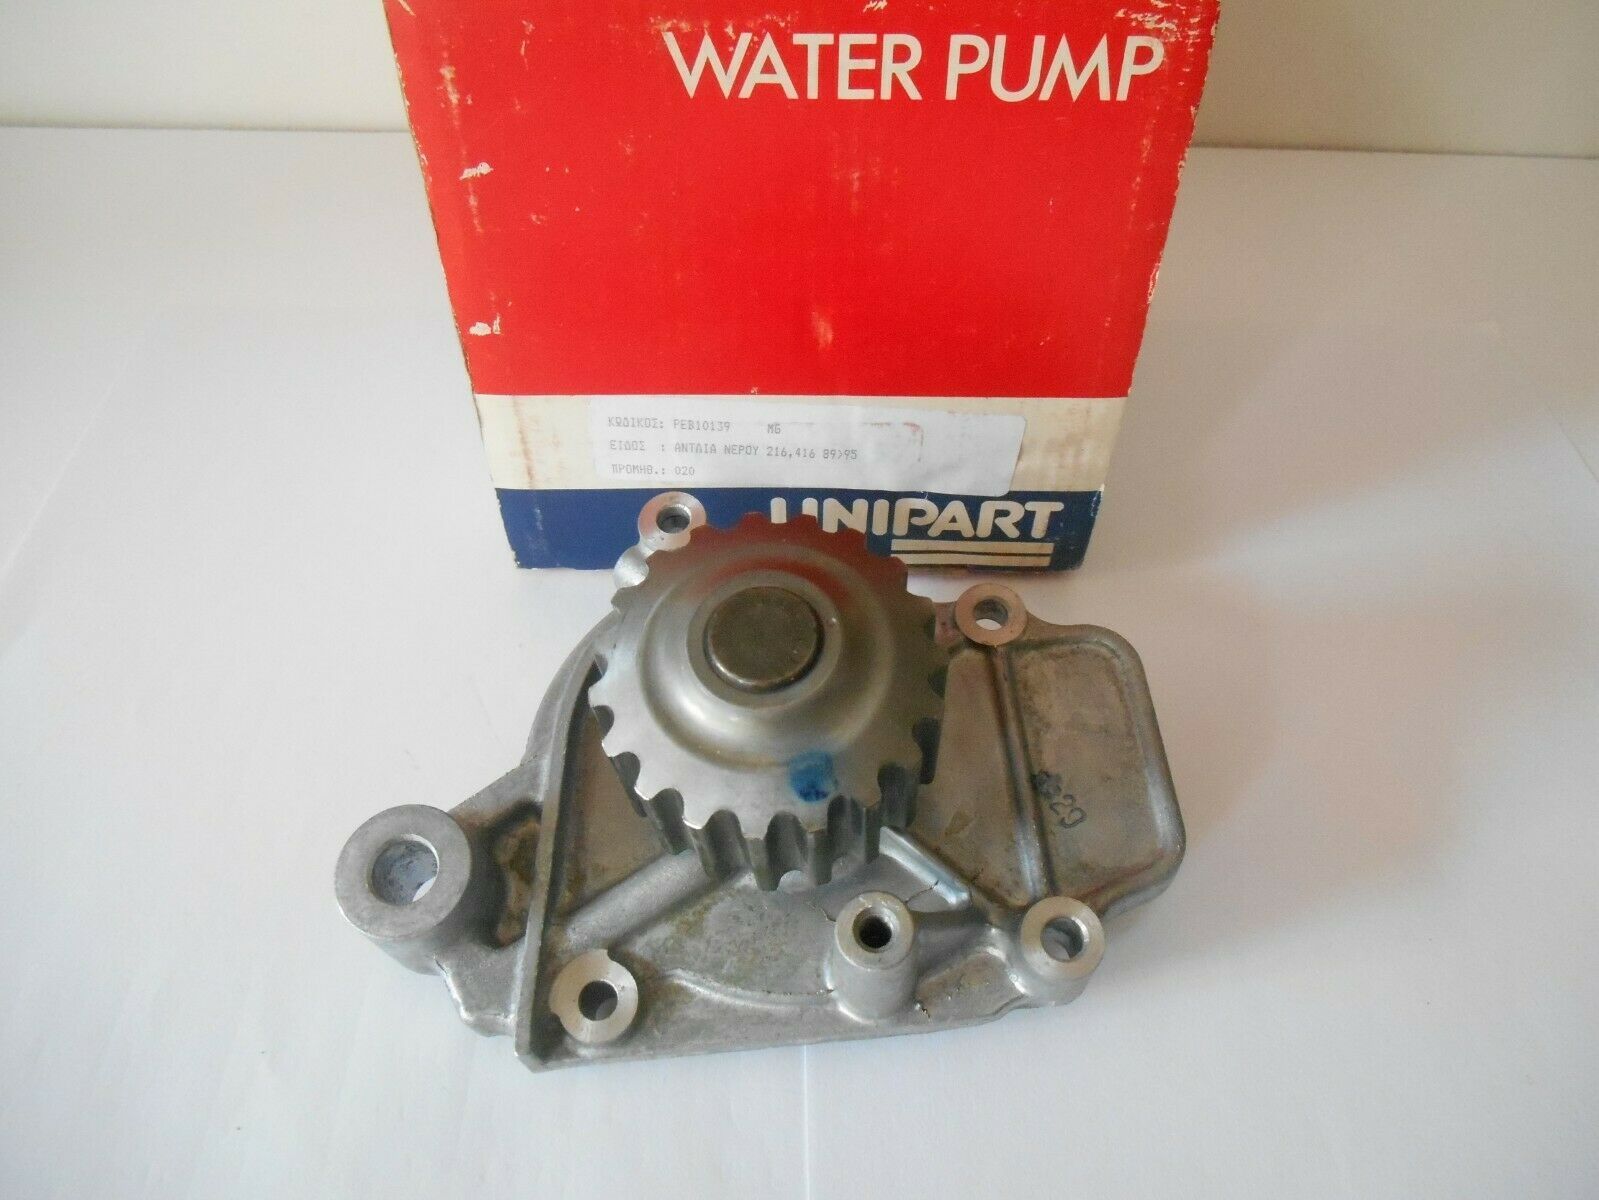 Water Pump For Rover 2.16 Gti 90-95 D16A8 FIts Honda Civic 1600cc 94-01 - $82.00